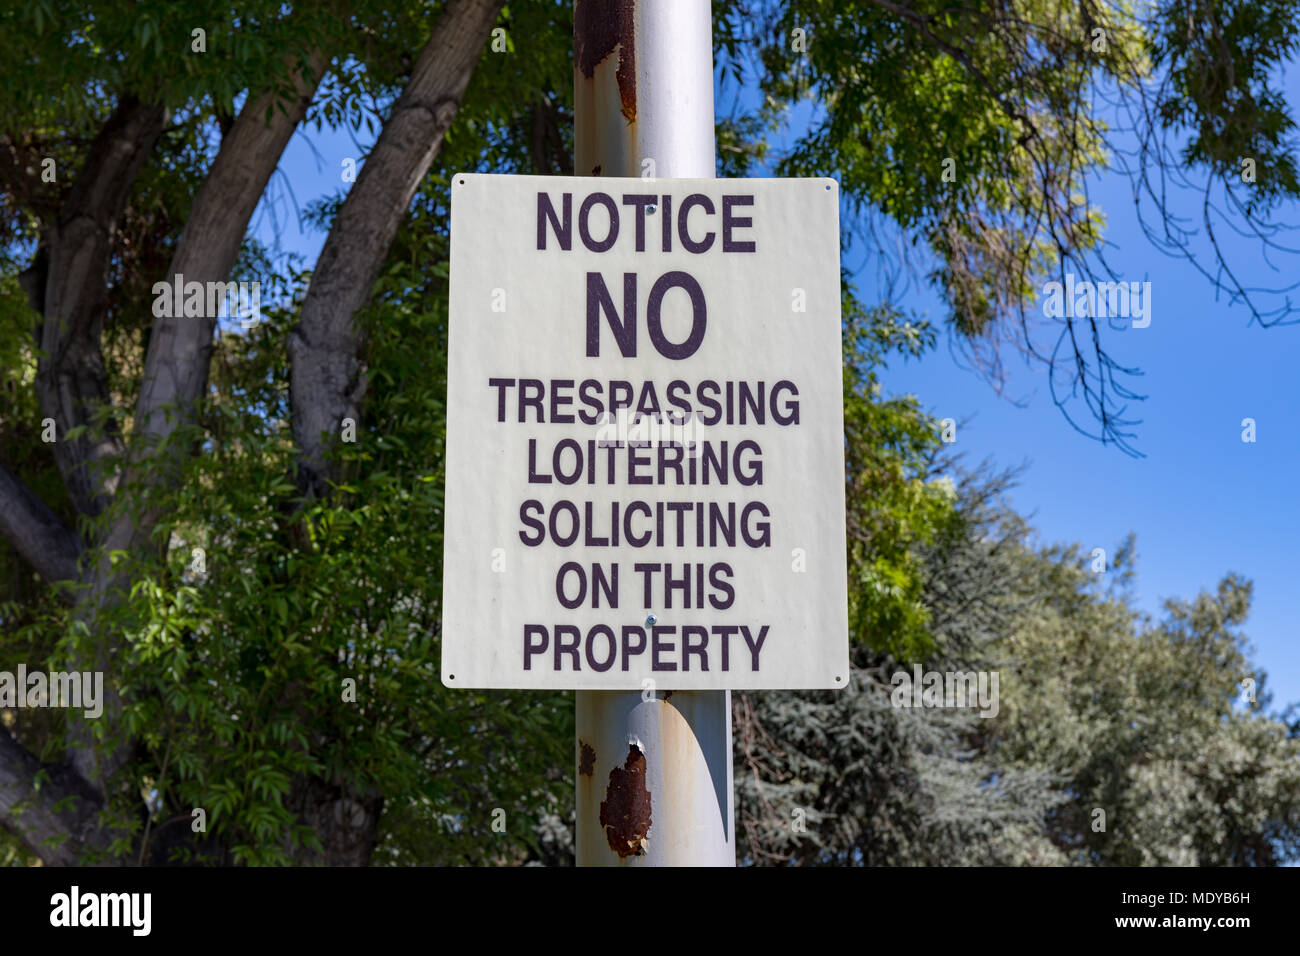 'Notice: No trespassing, loitering, soliciting on this property' sign Stock Photo